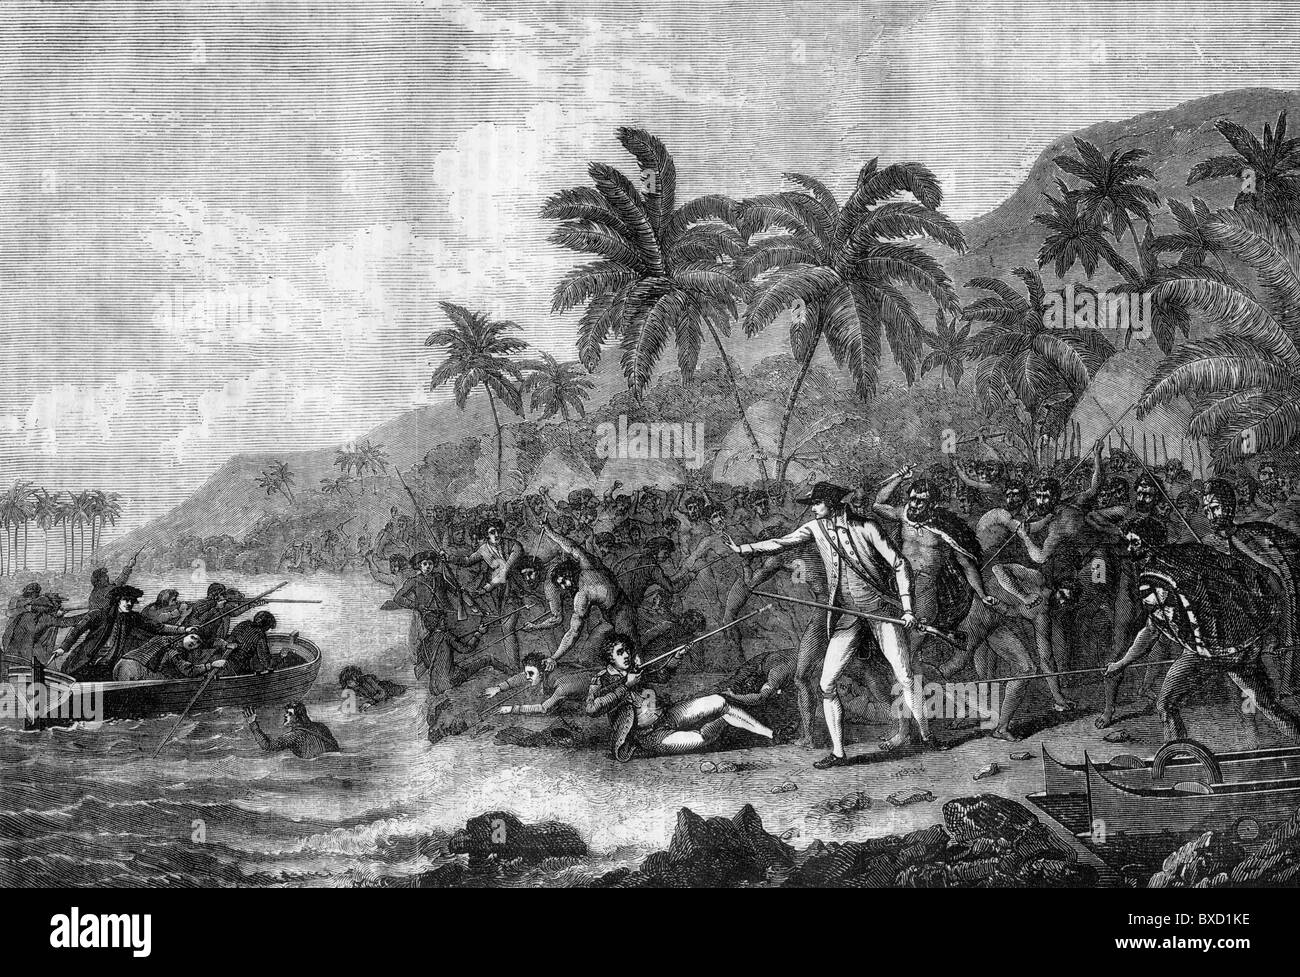 The Death of Captain James Cook at Kealakekua Bay on Hawaii ; Black and White Illustration; Stock Photo